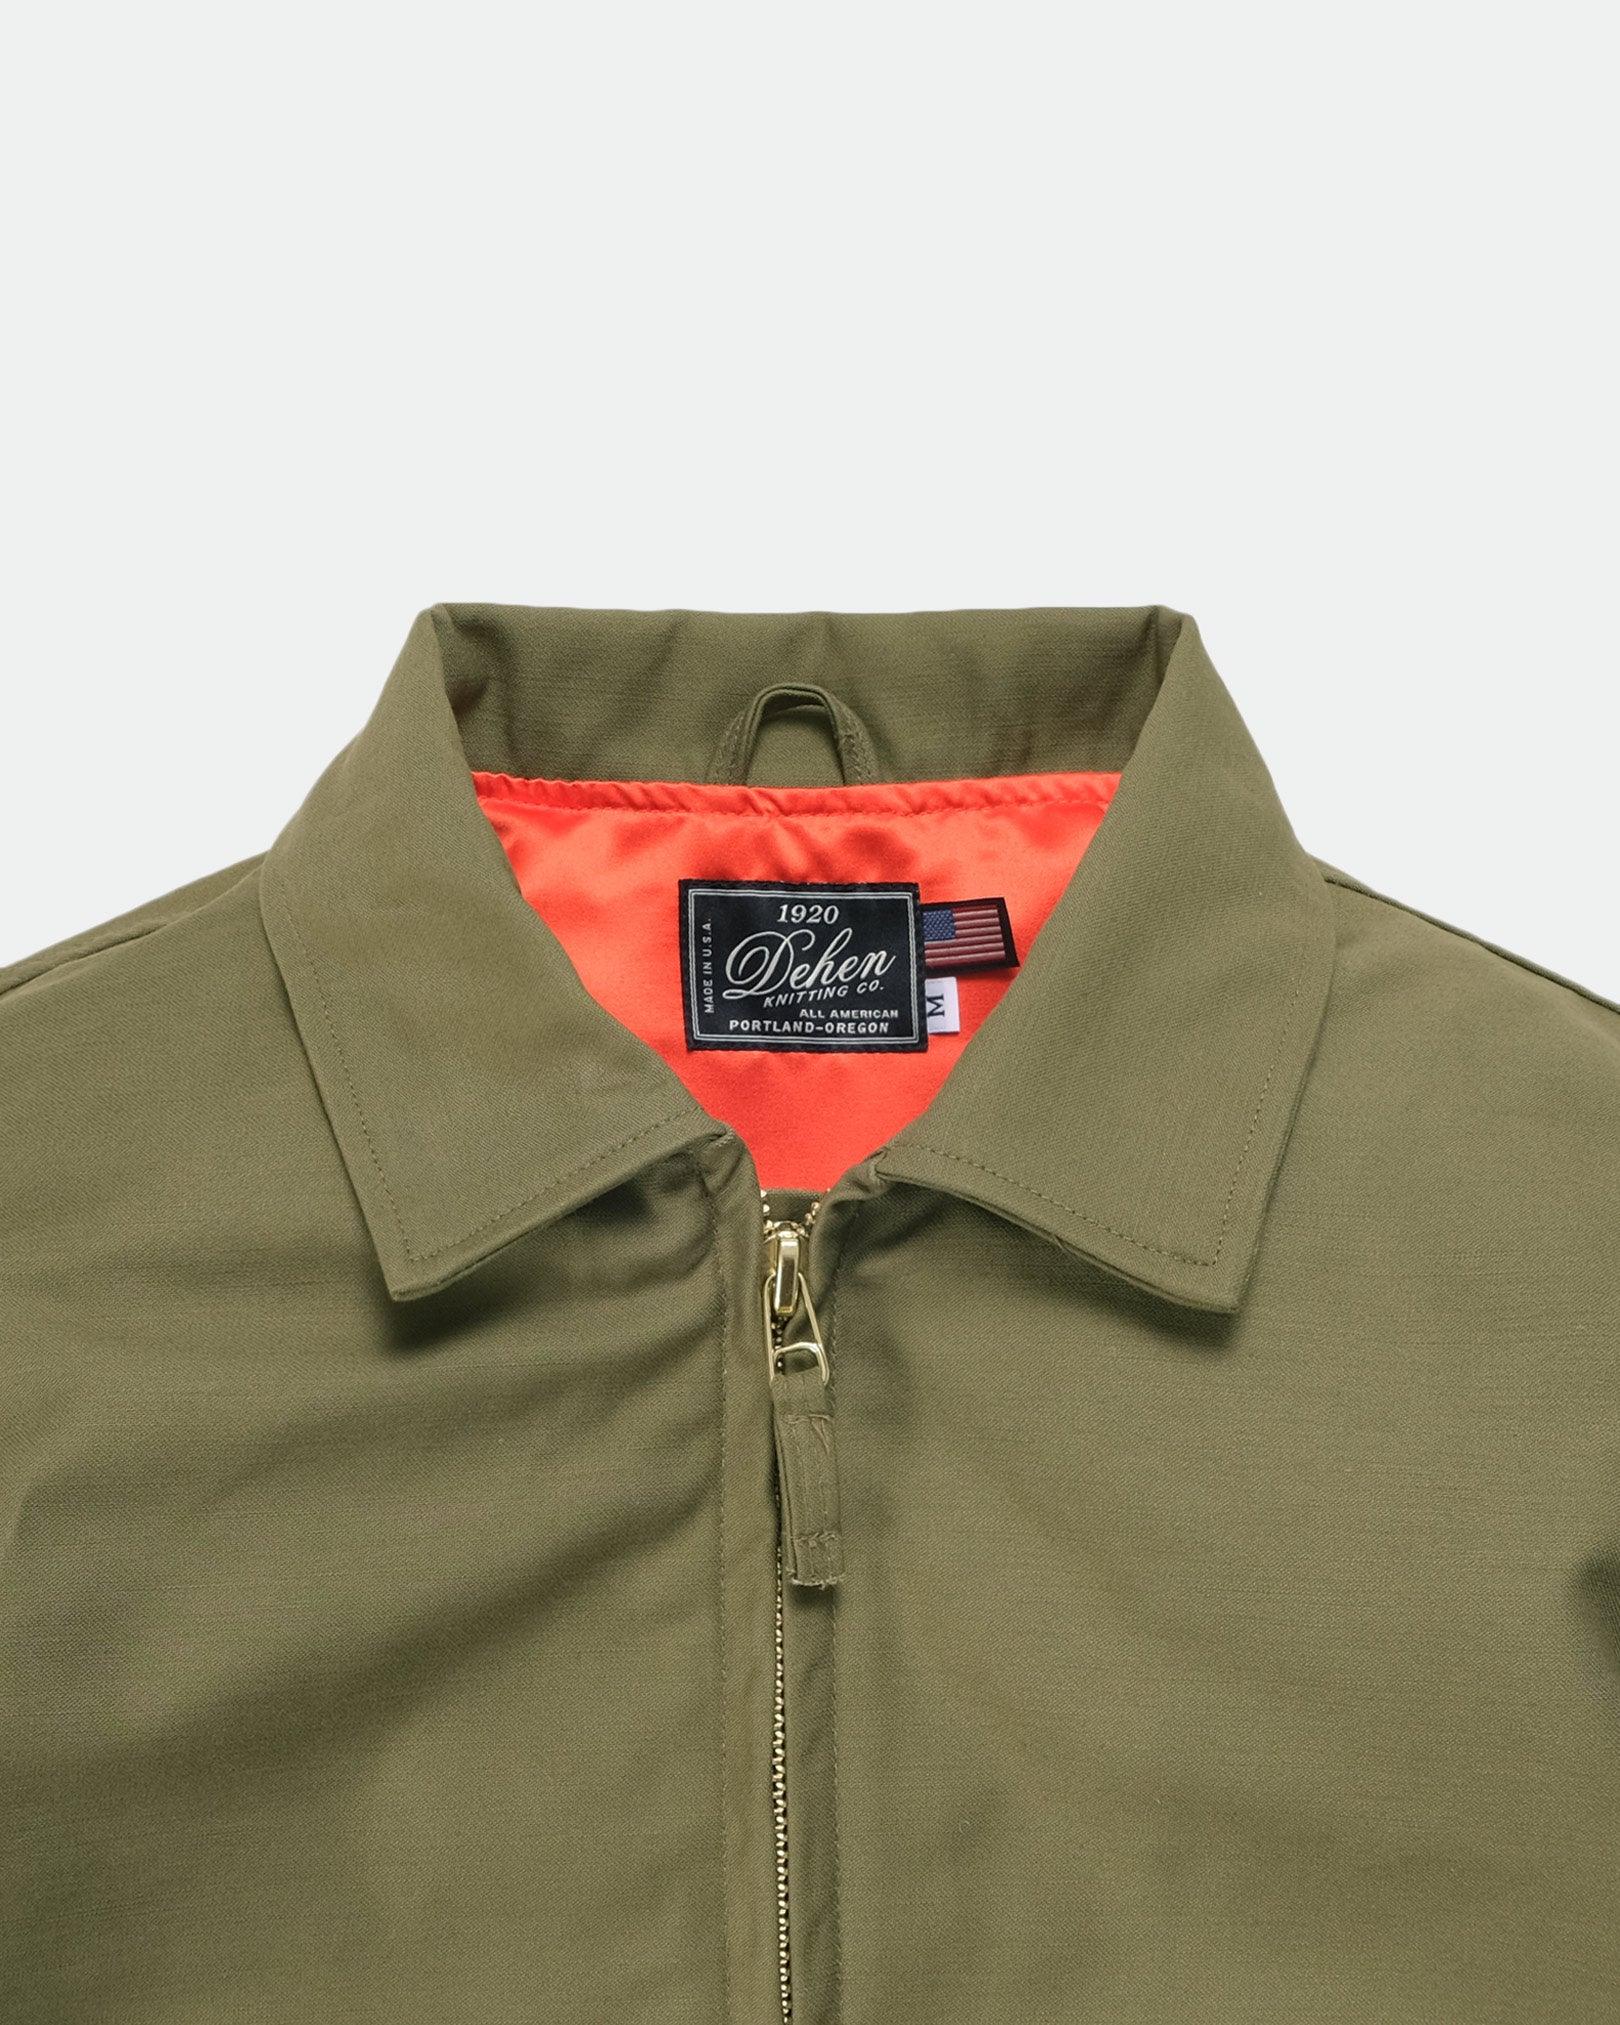 Image showing the DE-JA0070-OLV - Dehen 1920 Carrier Flight Jacket - Olive which is a Jackets described by the following info Dehen 1920, Jackets, Released, Tops and sold on the IRON HEART GERMANY online store